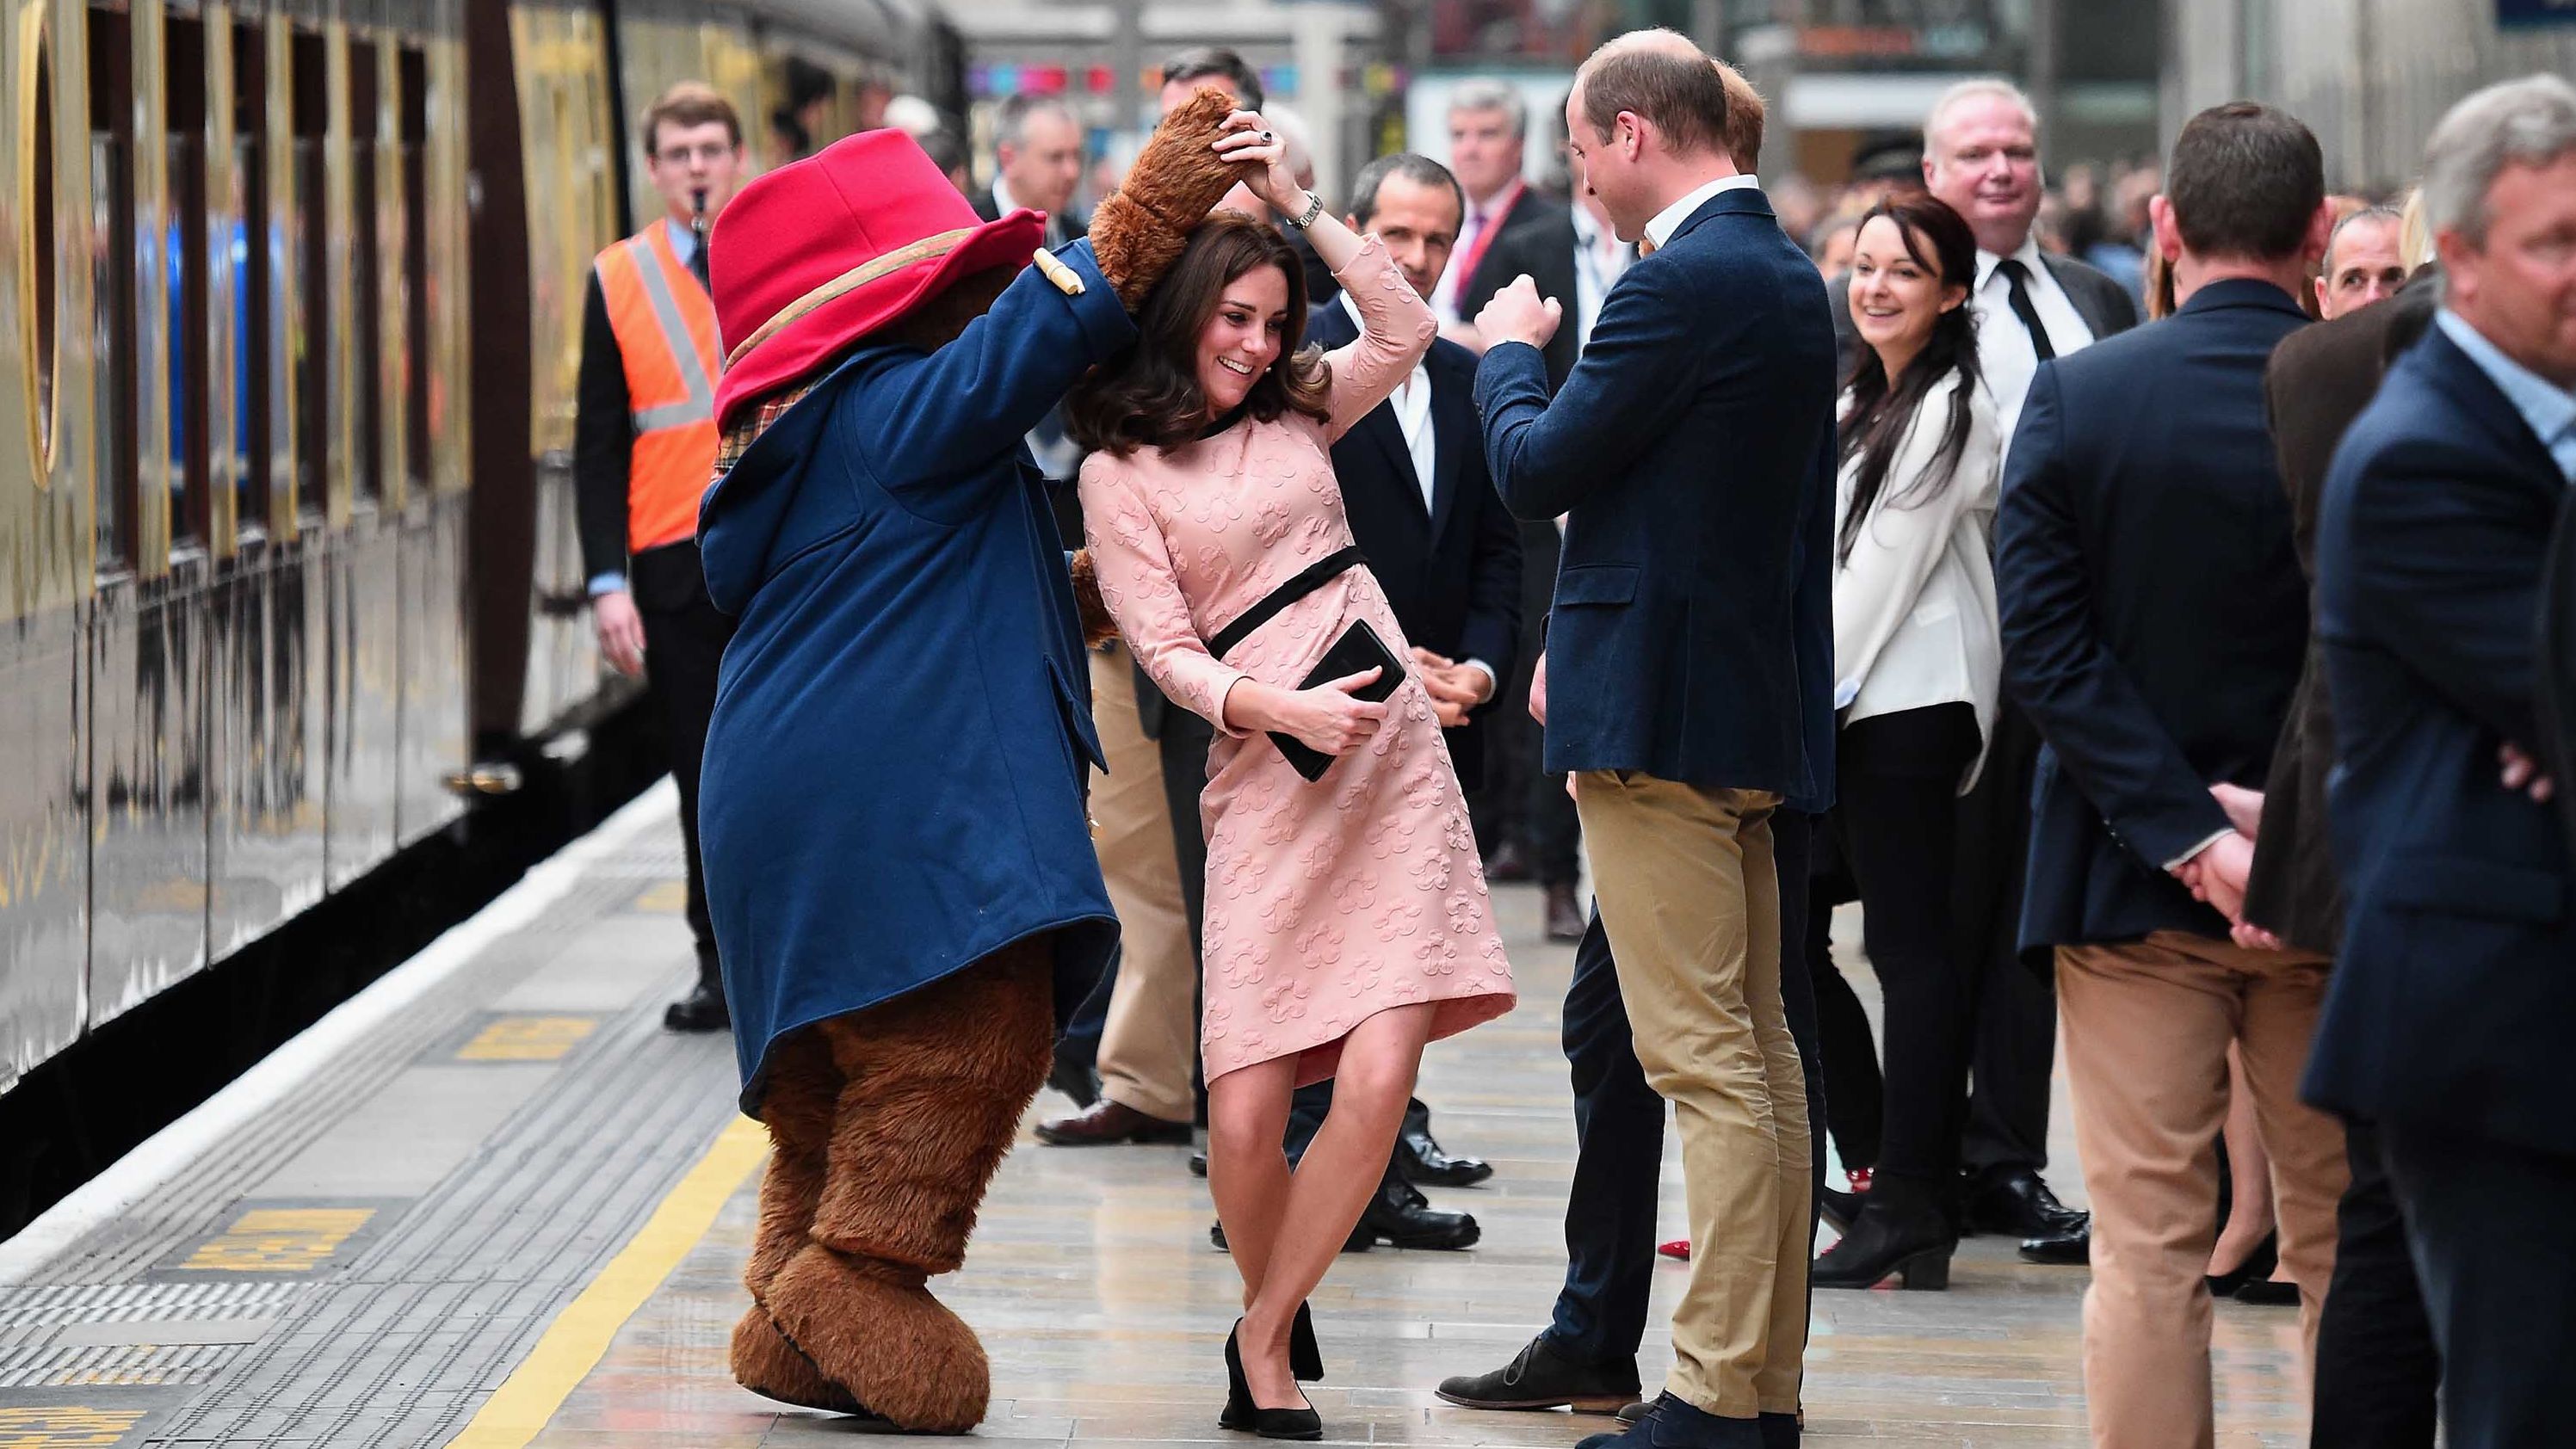 Paddington Bear dances with Catherine during a charity event in London in October 2017.